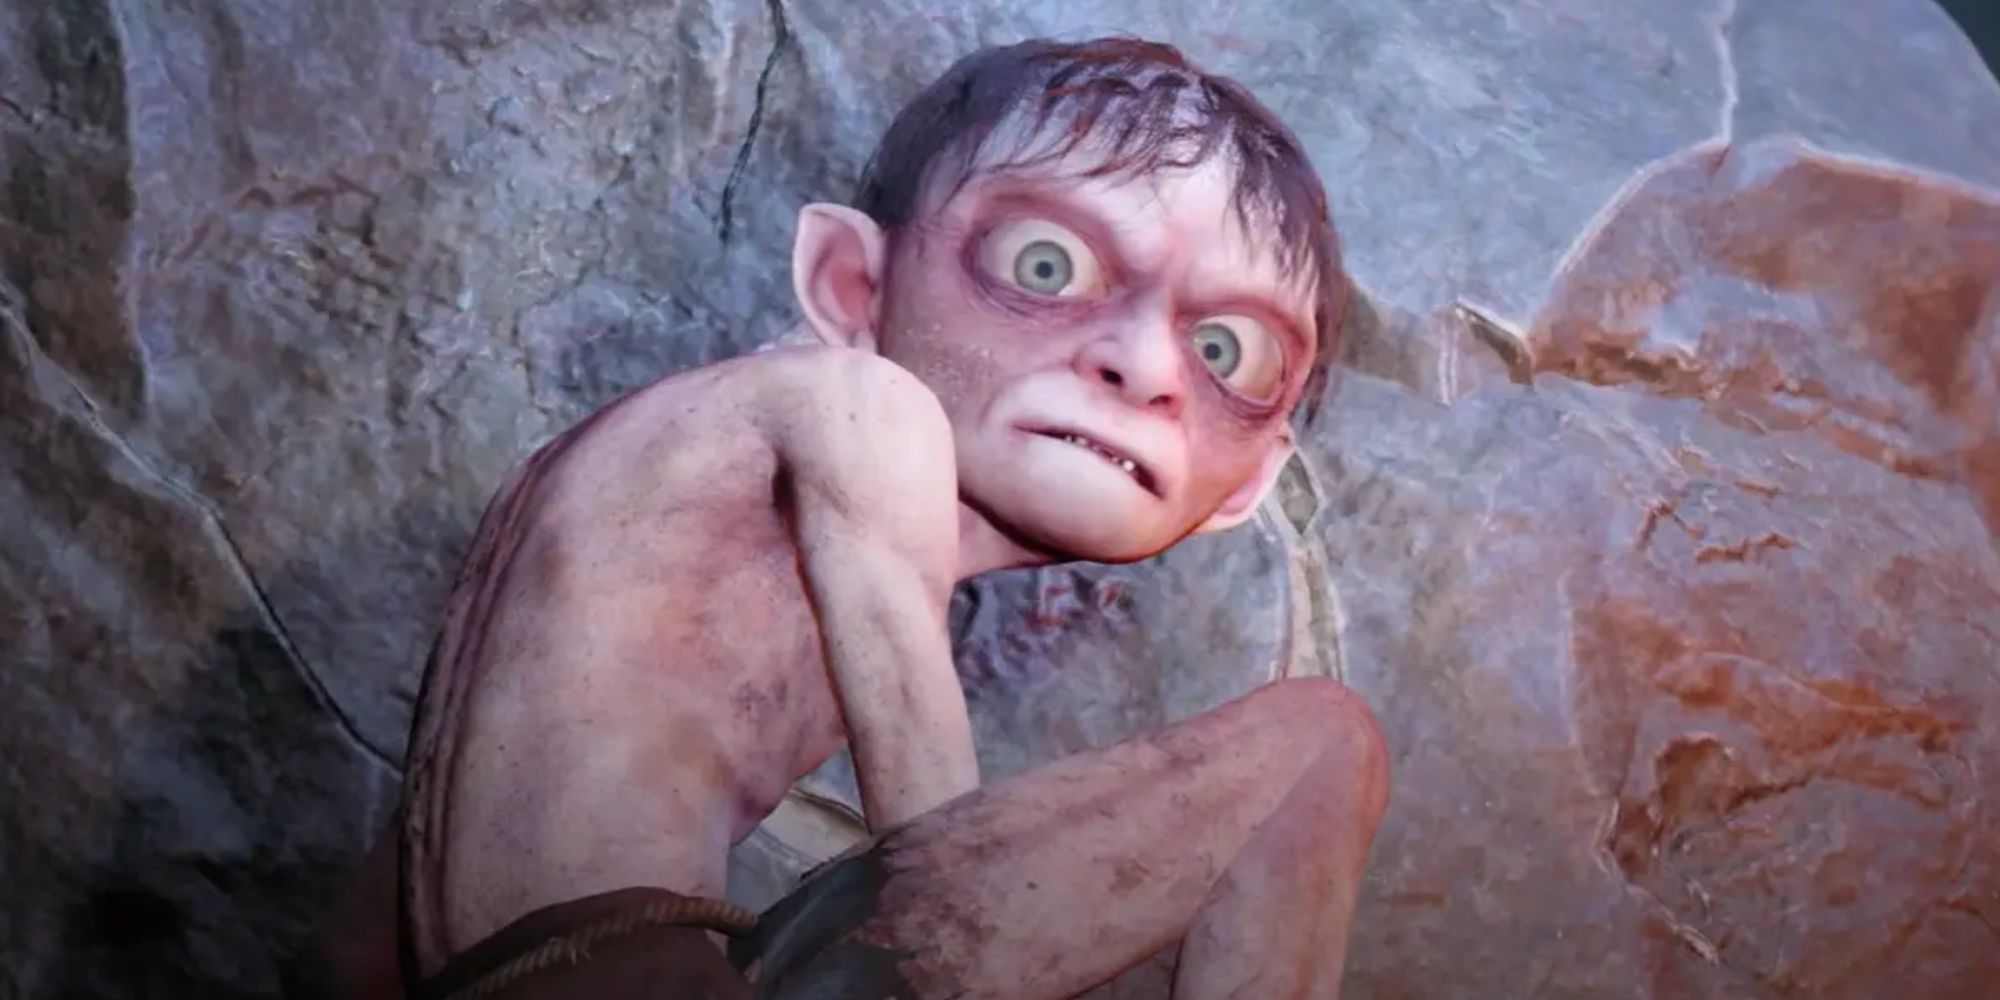 Gollum from Lord of the Rings: Gollum crouching